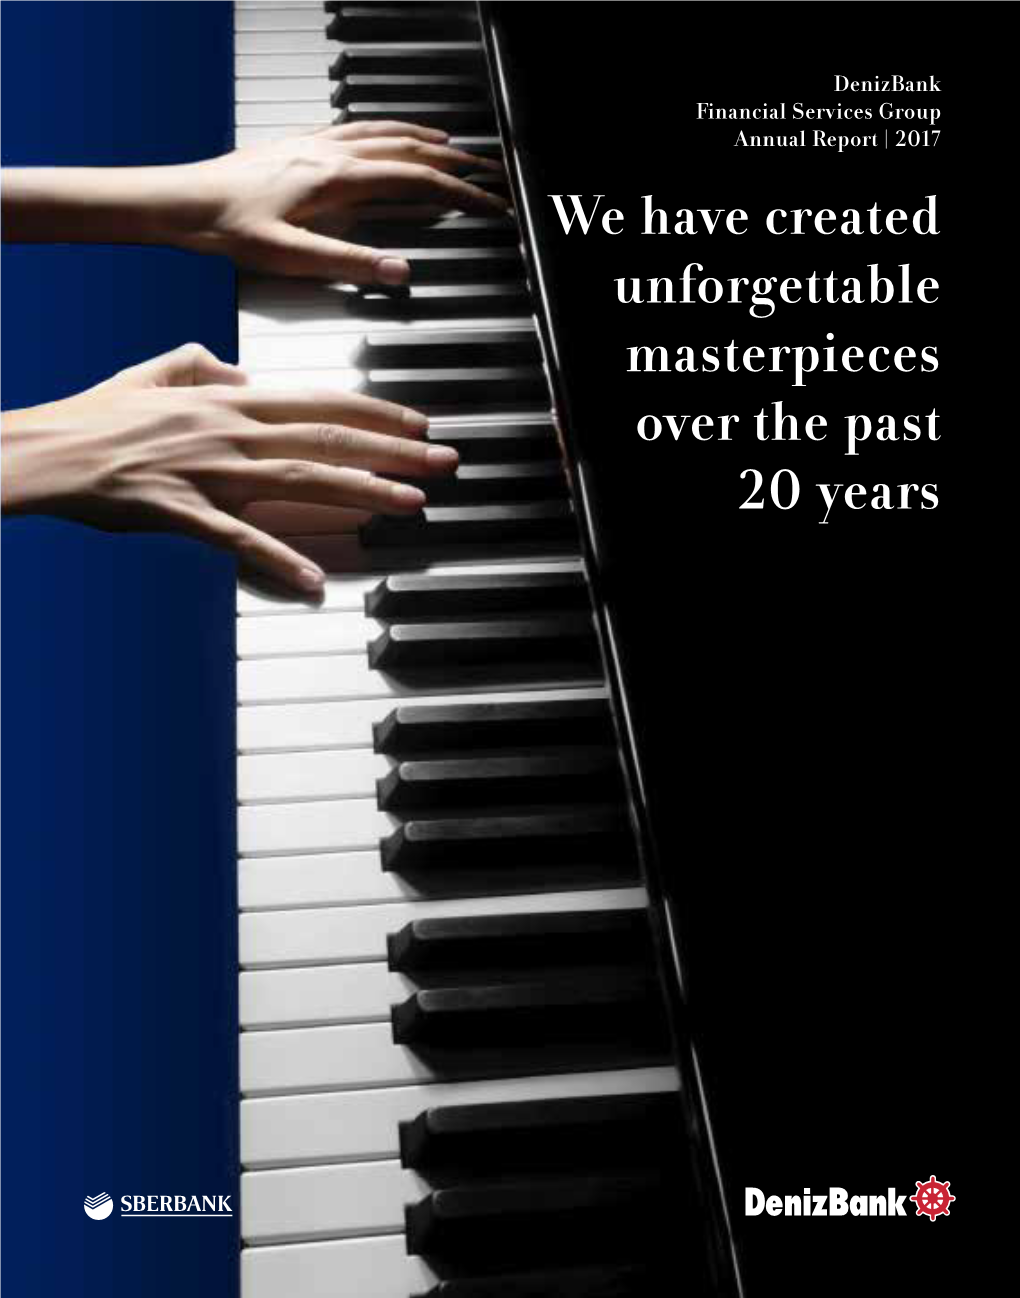 We Have Created Unforgettable Masterpieces Over the Past 20 Years